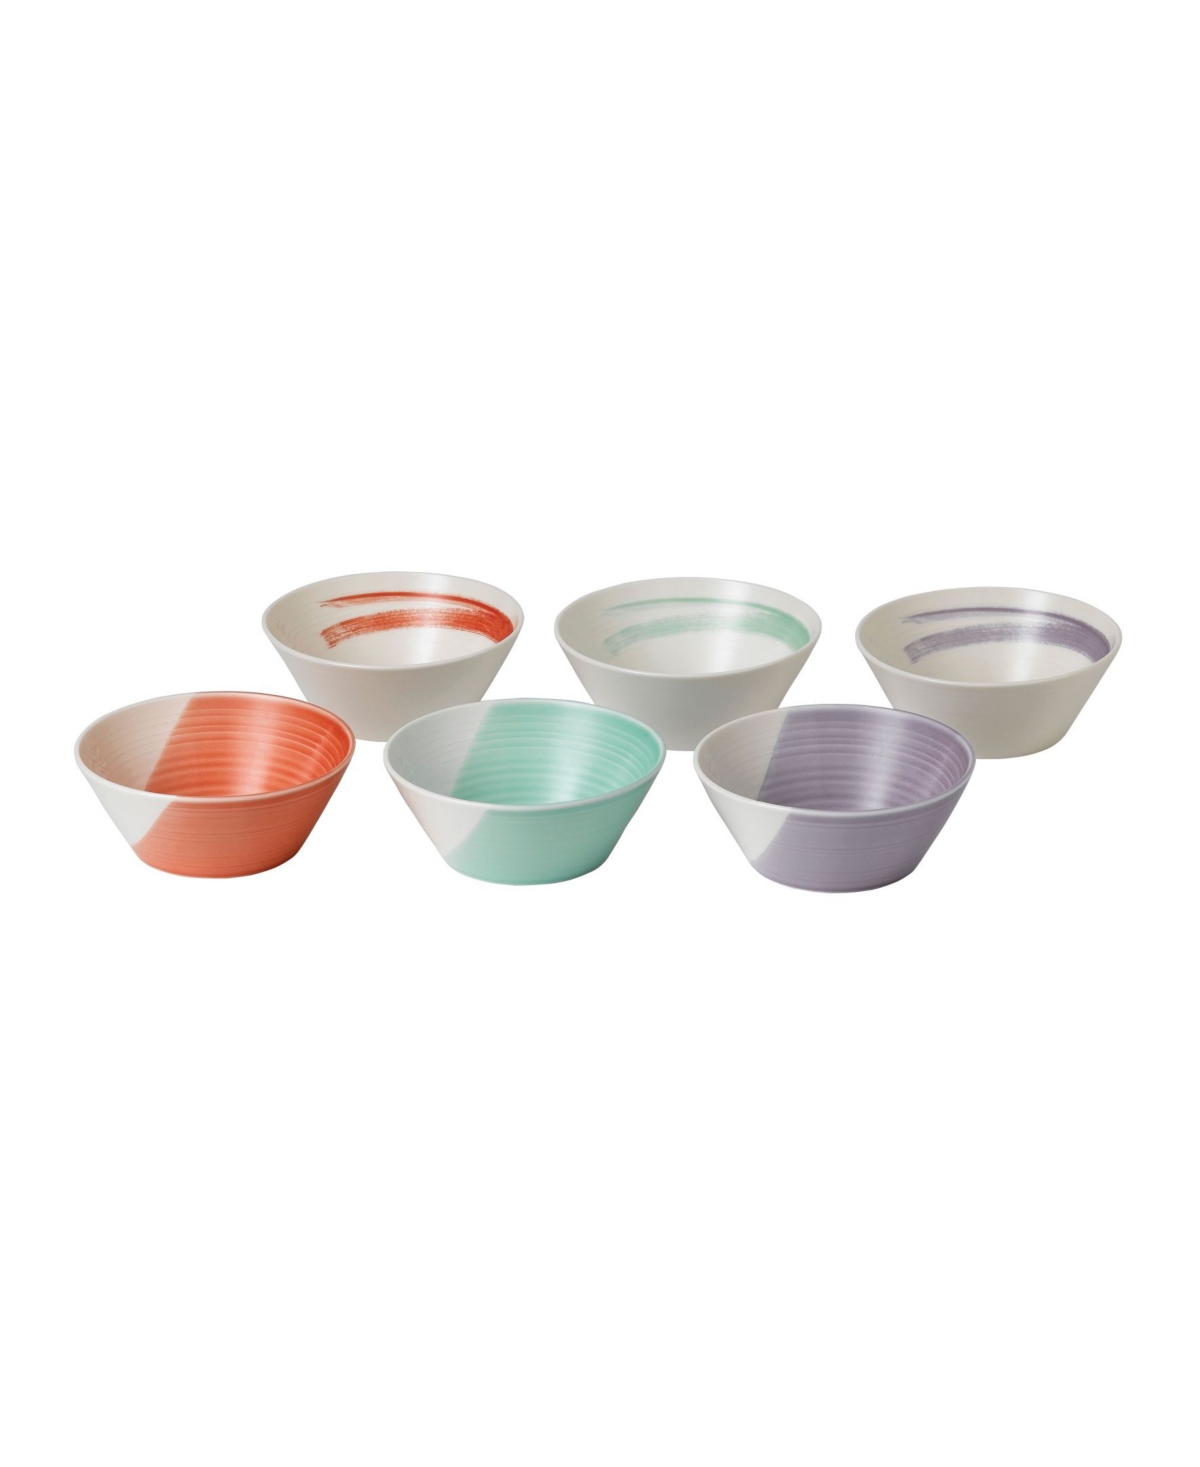 1815 Bold 6.3" Cereal Bowl, Set of 6 - Multi